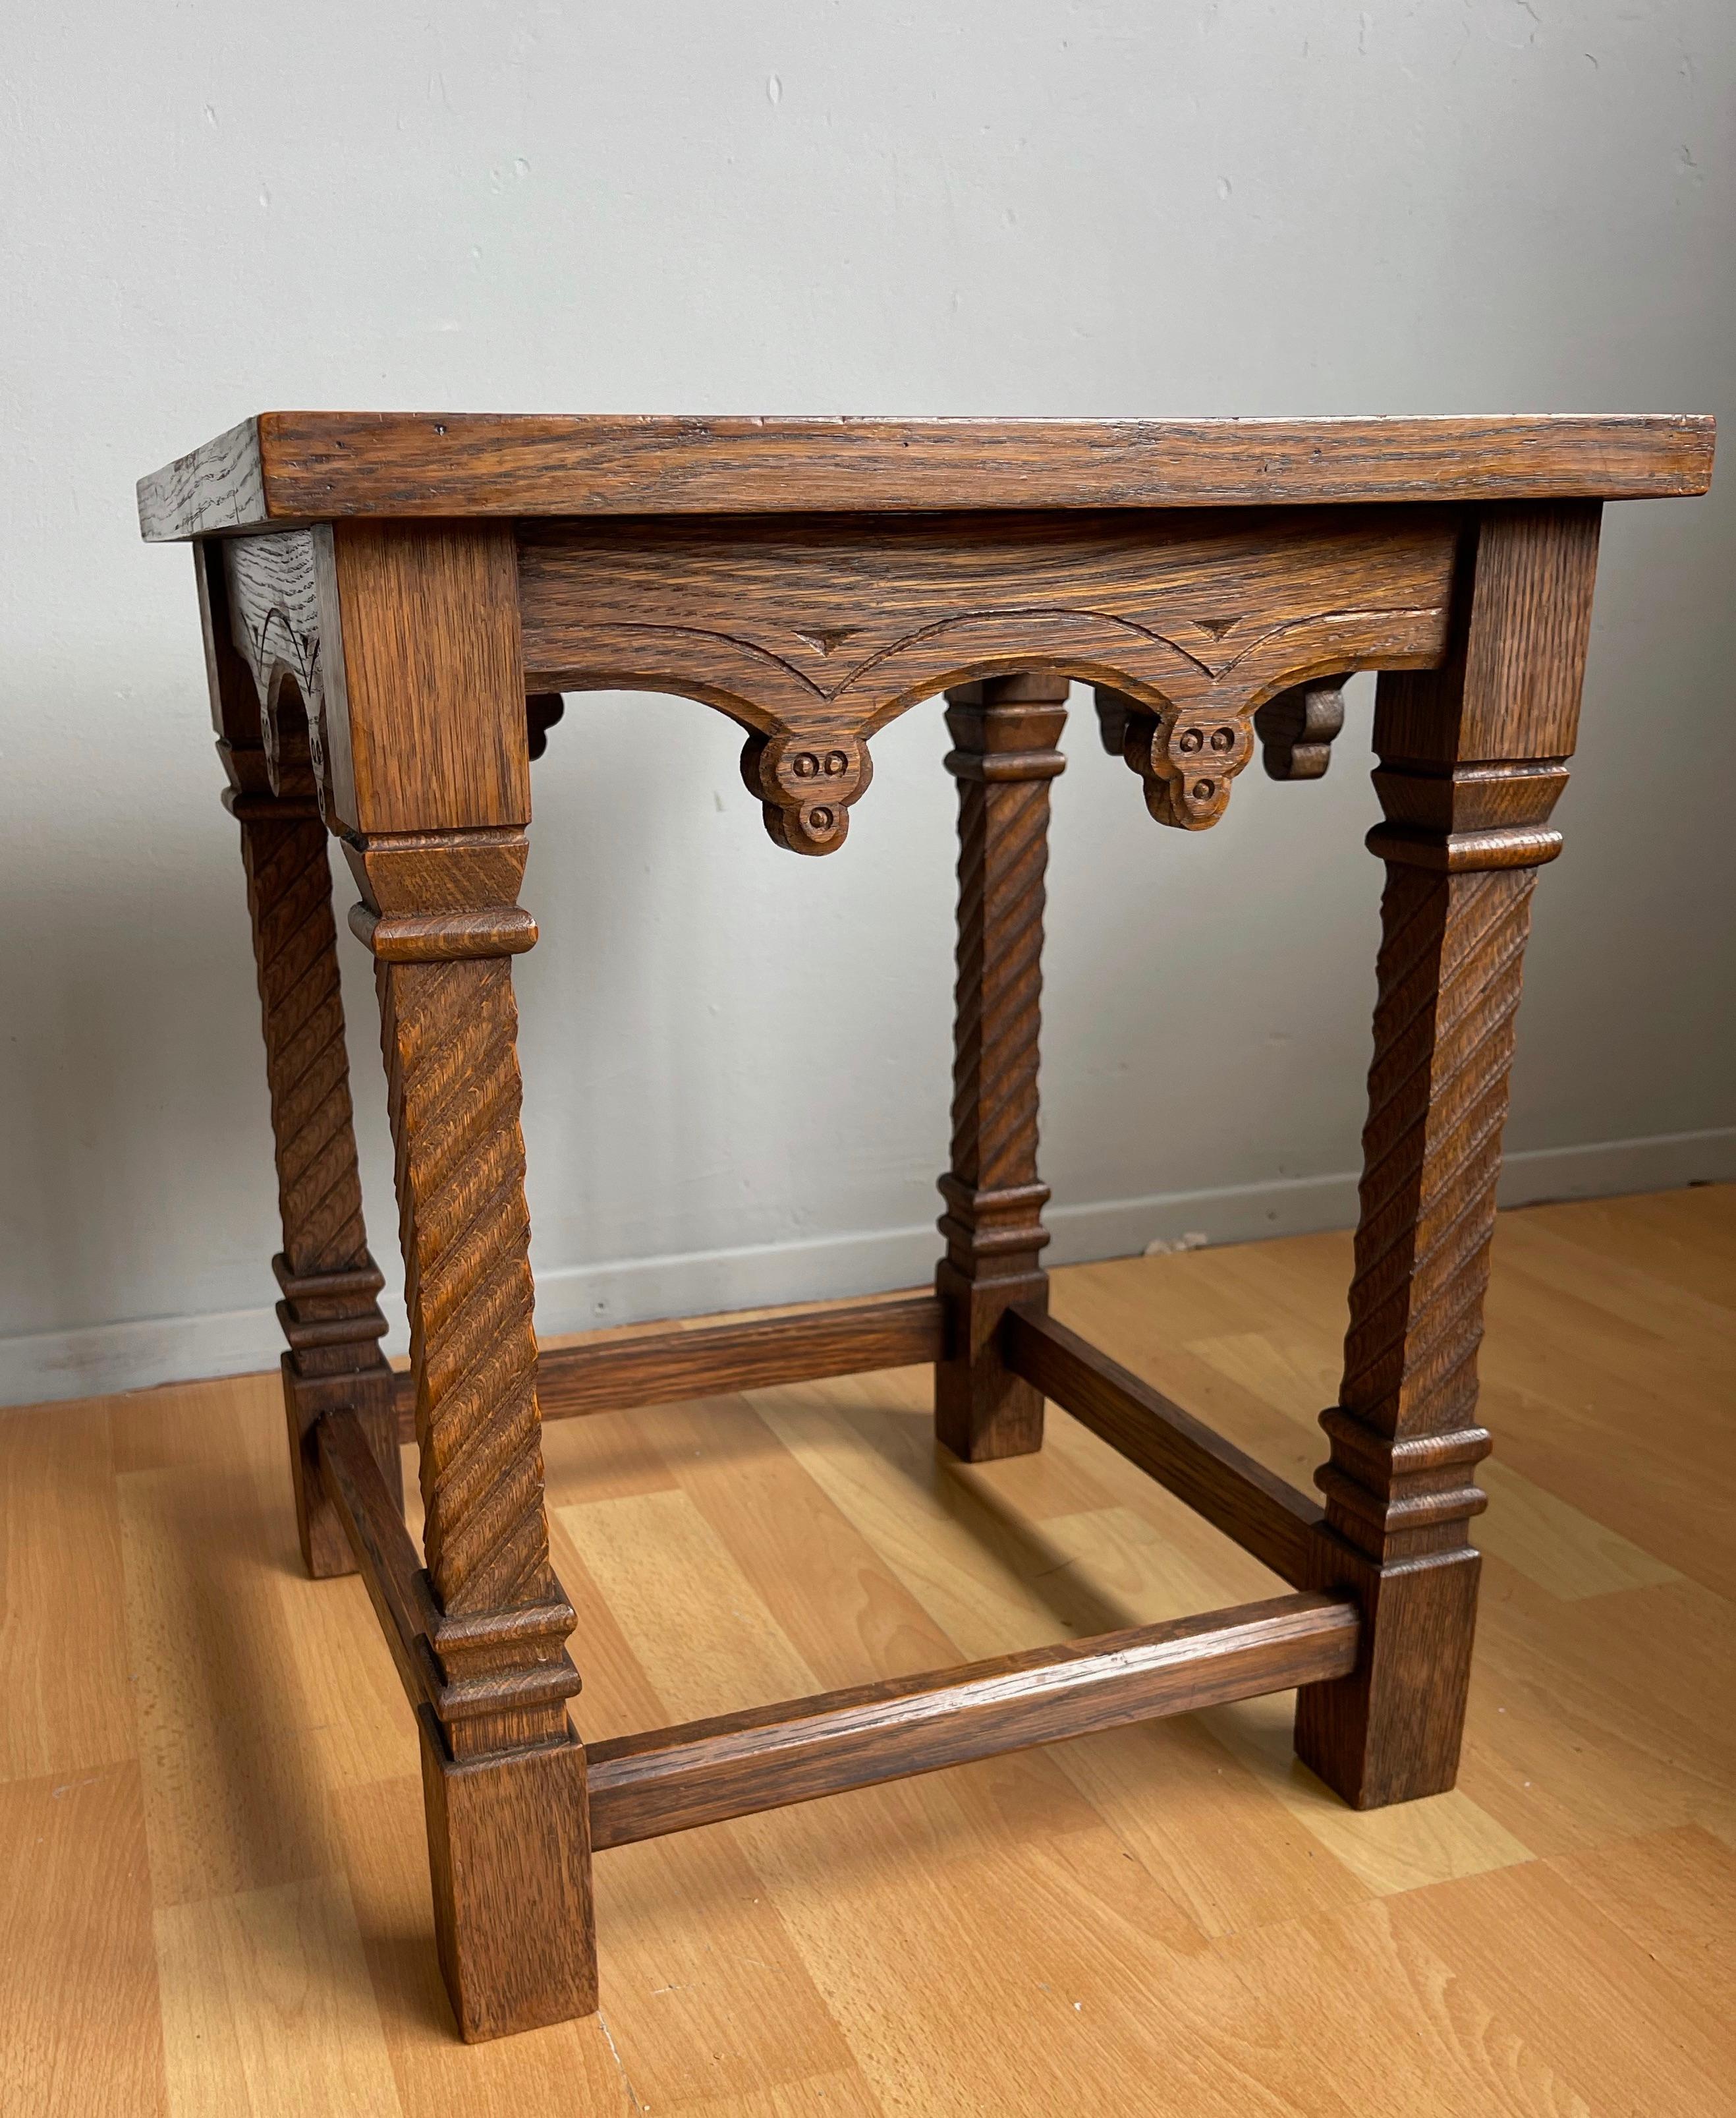 Hand Carved Antique Gothic Revival Practical End Table w. Inlaid Envelope Motif For Sale 4